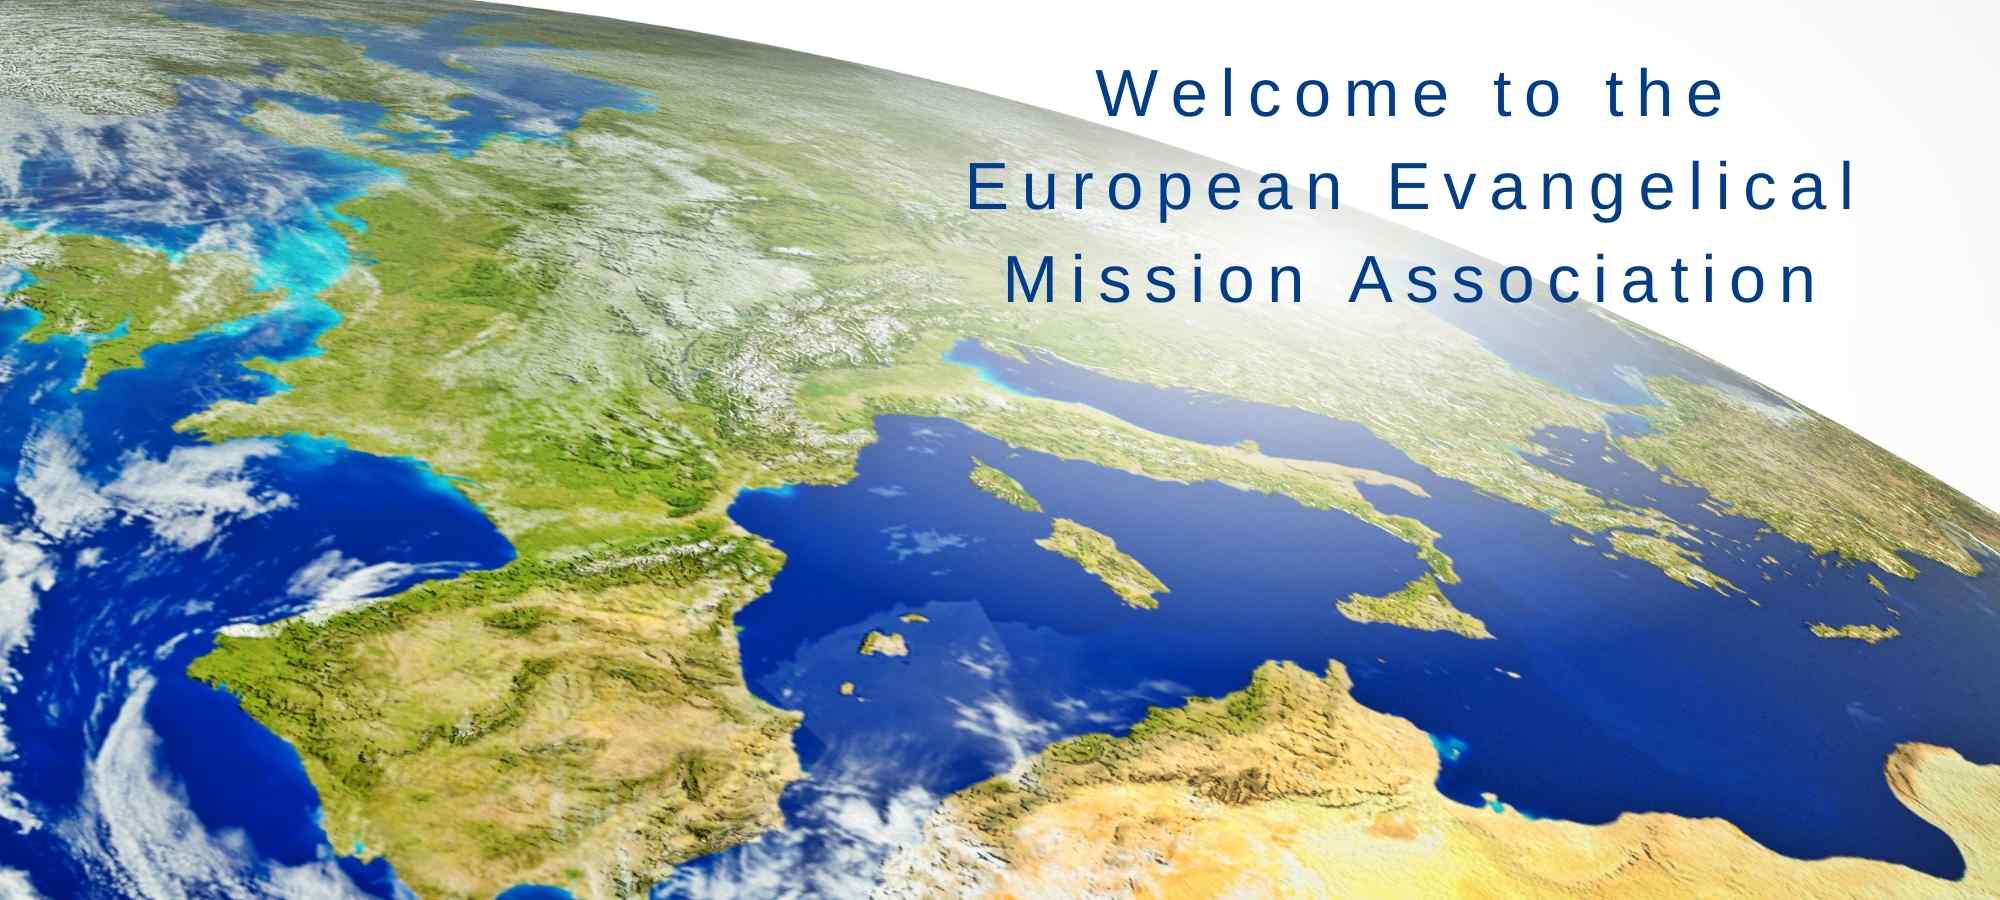 Welcome to the European Evangelical Mission Association

Build with Canva Pro